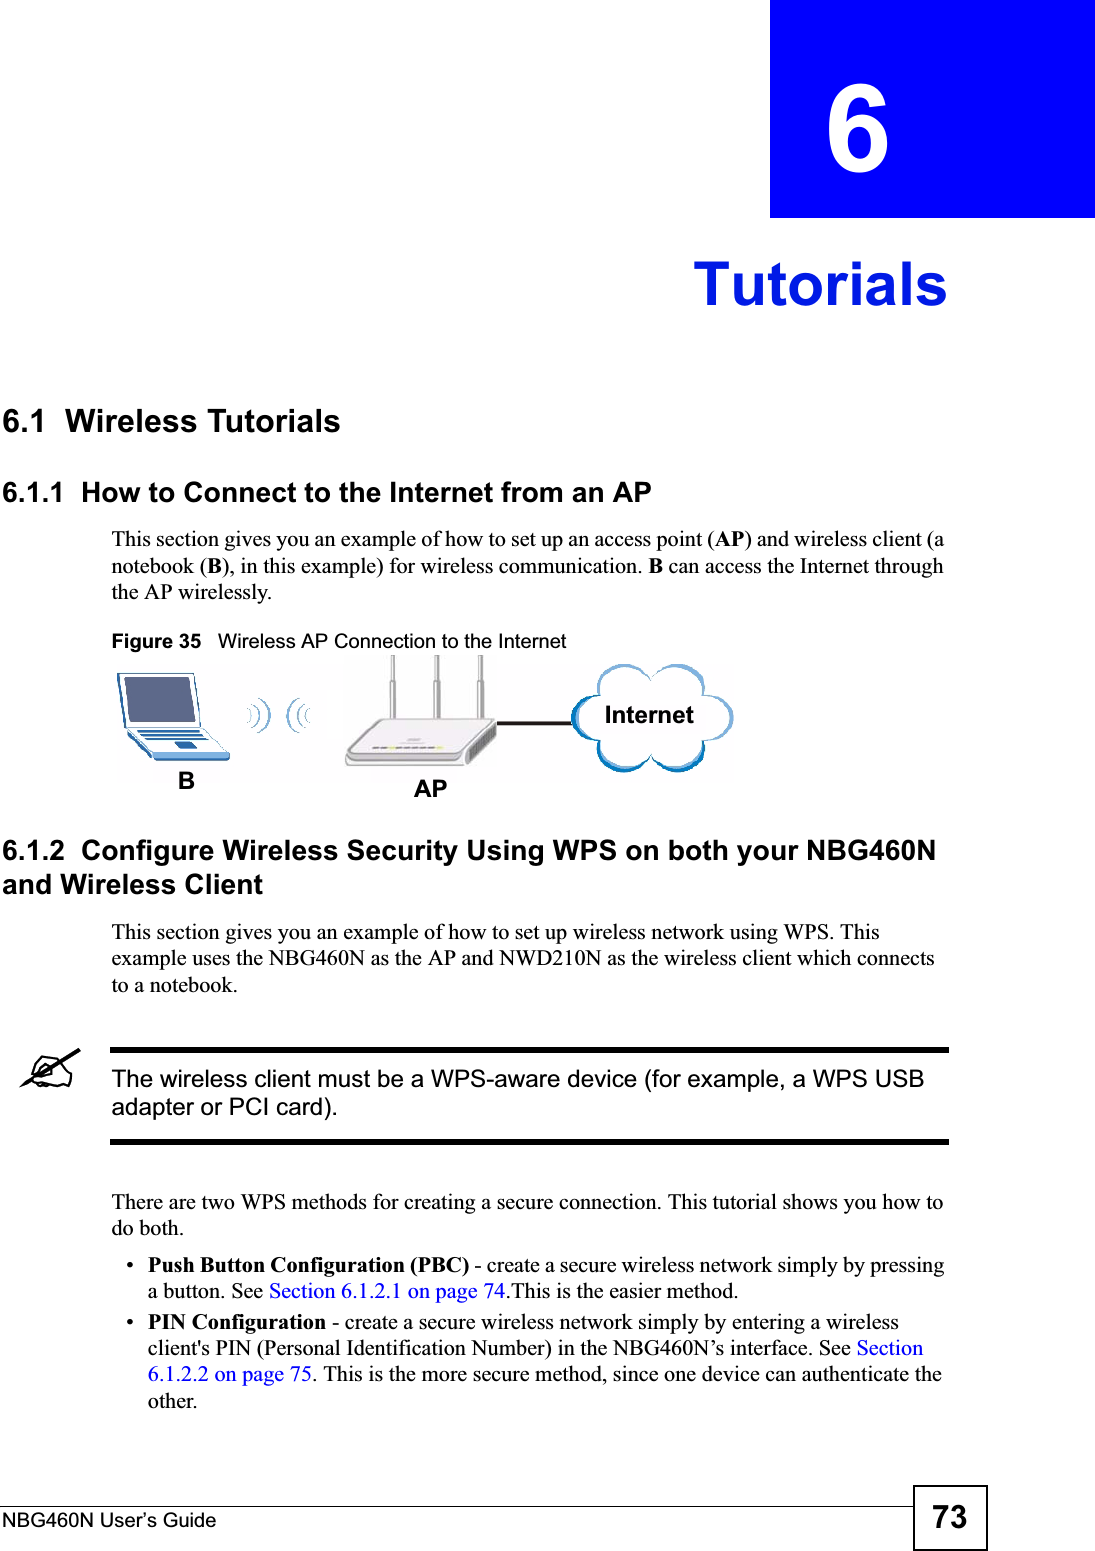 NBG460N User’s Guide 73CHAPTER  6 Tutorials6.1  Wireless Tutorials6.1.1  How to Connect to the Internet from an APThis section gives you an example of how to set up an access point (AP) and wireless client (a notebook (B), in this example) for wireless communication. B can access the Internet through the AP wirelessly.Figure 35   Wireless AP Connection to the Internet6.1.2  Configure Wireless Security Using WPS on both your NBG460N and Wireless ClientThis section gives you an example of how to set up wireless network using WPS. This example uses the NBG460N as the AP and NWD210N as the wireless client which connects to a notebook. &quot;The wireless client must be a WPS-aware device (for example, a WPS USB adapter or PCI card).There are two WPS methods for creating a secure connection. This tutorial shows you how to do both.•Push Button Configuration (PBC) - create a secure wireless network simply by pressing a button. See Section 6.1.2.1 on page 74.This is the easier method.•PIN Configuration - create a secure wireless network simply by entering a wireless client&apos;s PIN (Personal Identification Number) in the NBG460N’s interface. See Section6.1.2.2 on page 75. This is the more secure method, since one device can authenticate the other.BAPInternet